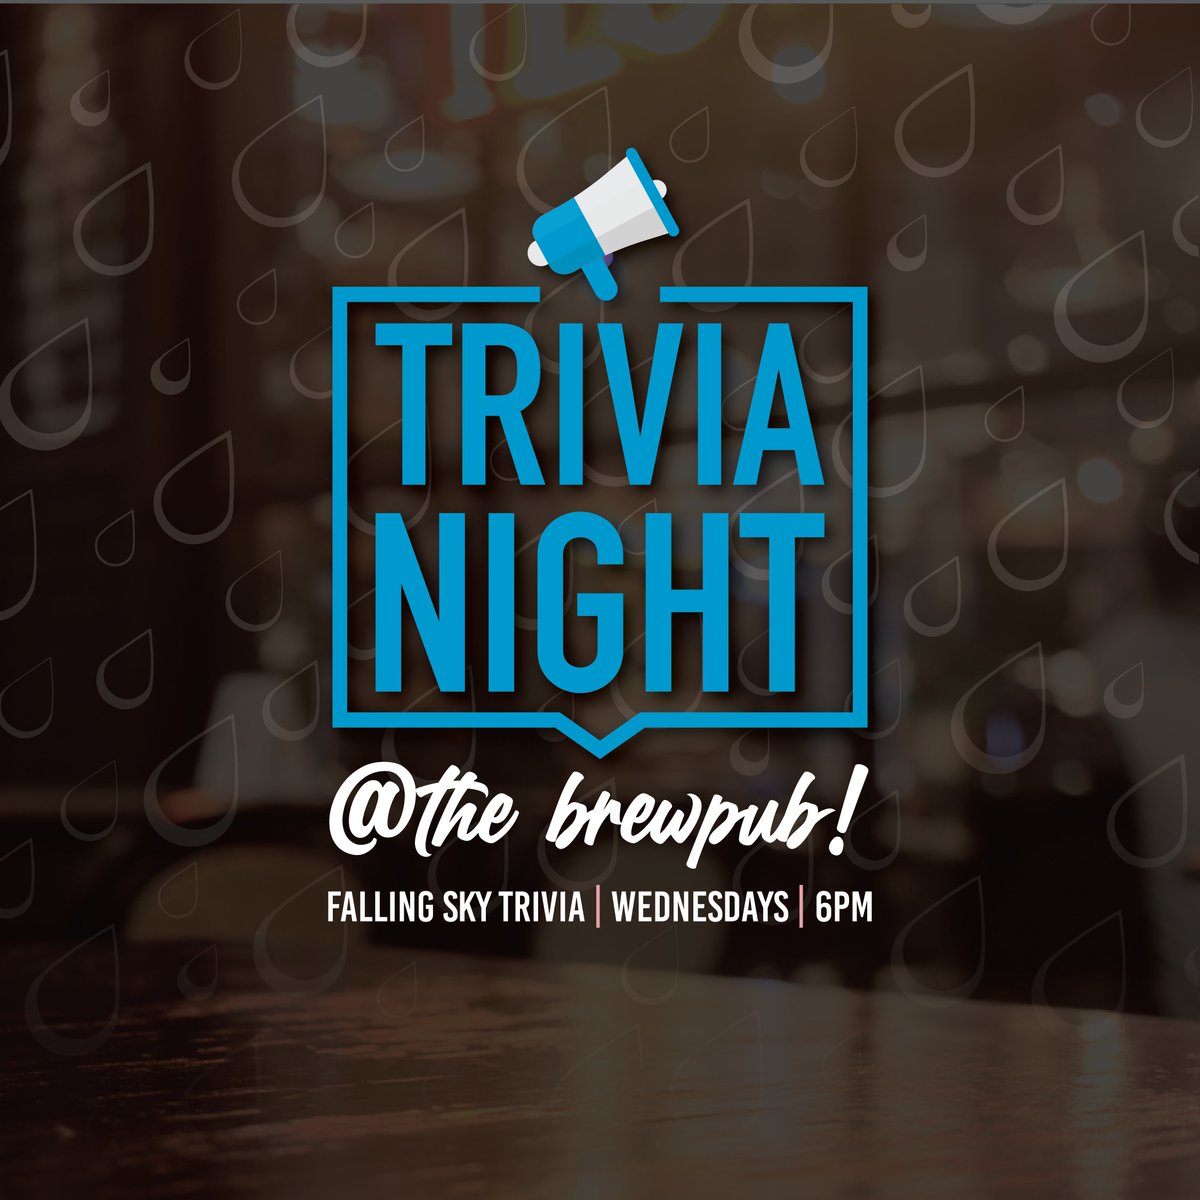 TRIVIA NIGHT TONIGHT AT THE PUB!
Come flex your trivia muscles, eat some good food, and drink some great beer!

When: Tonight starting at 6:00 p.m.
Where: The Pub - 1334 Oak Alley Eugene, OR 97401
_____
#PubFun #DowntownEugene #Eugene #LetitPOUR